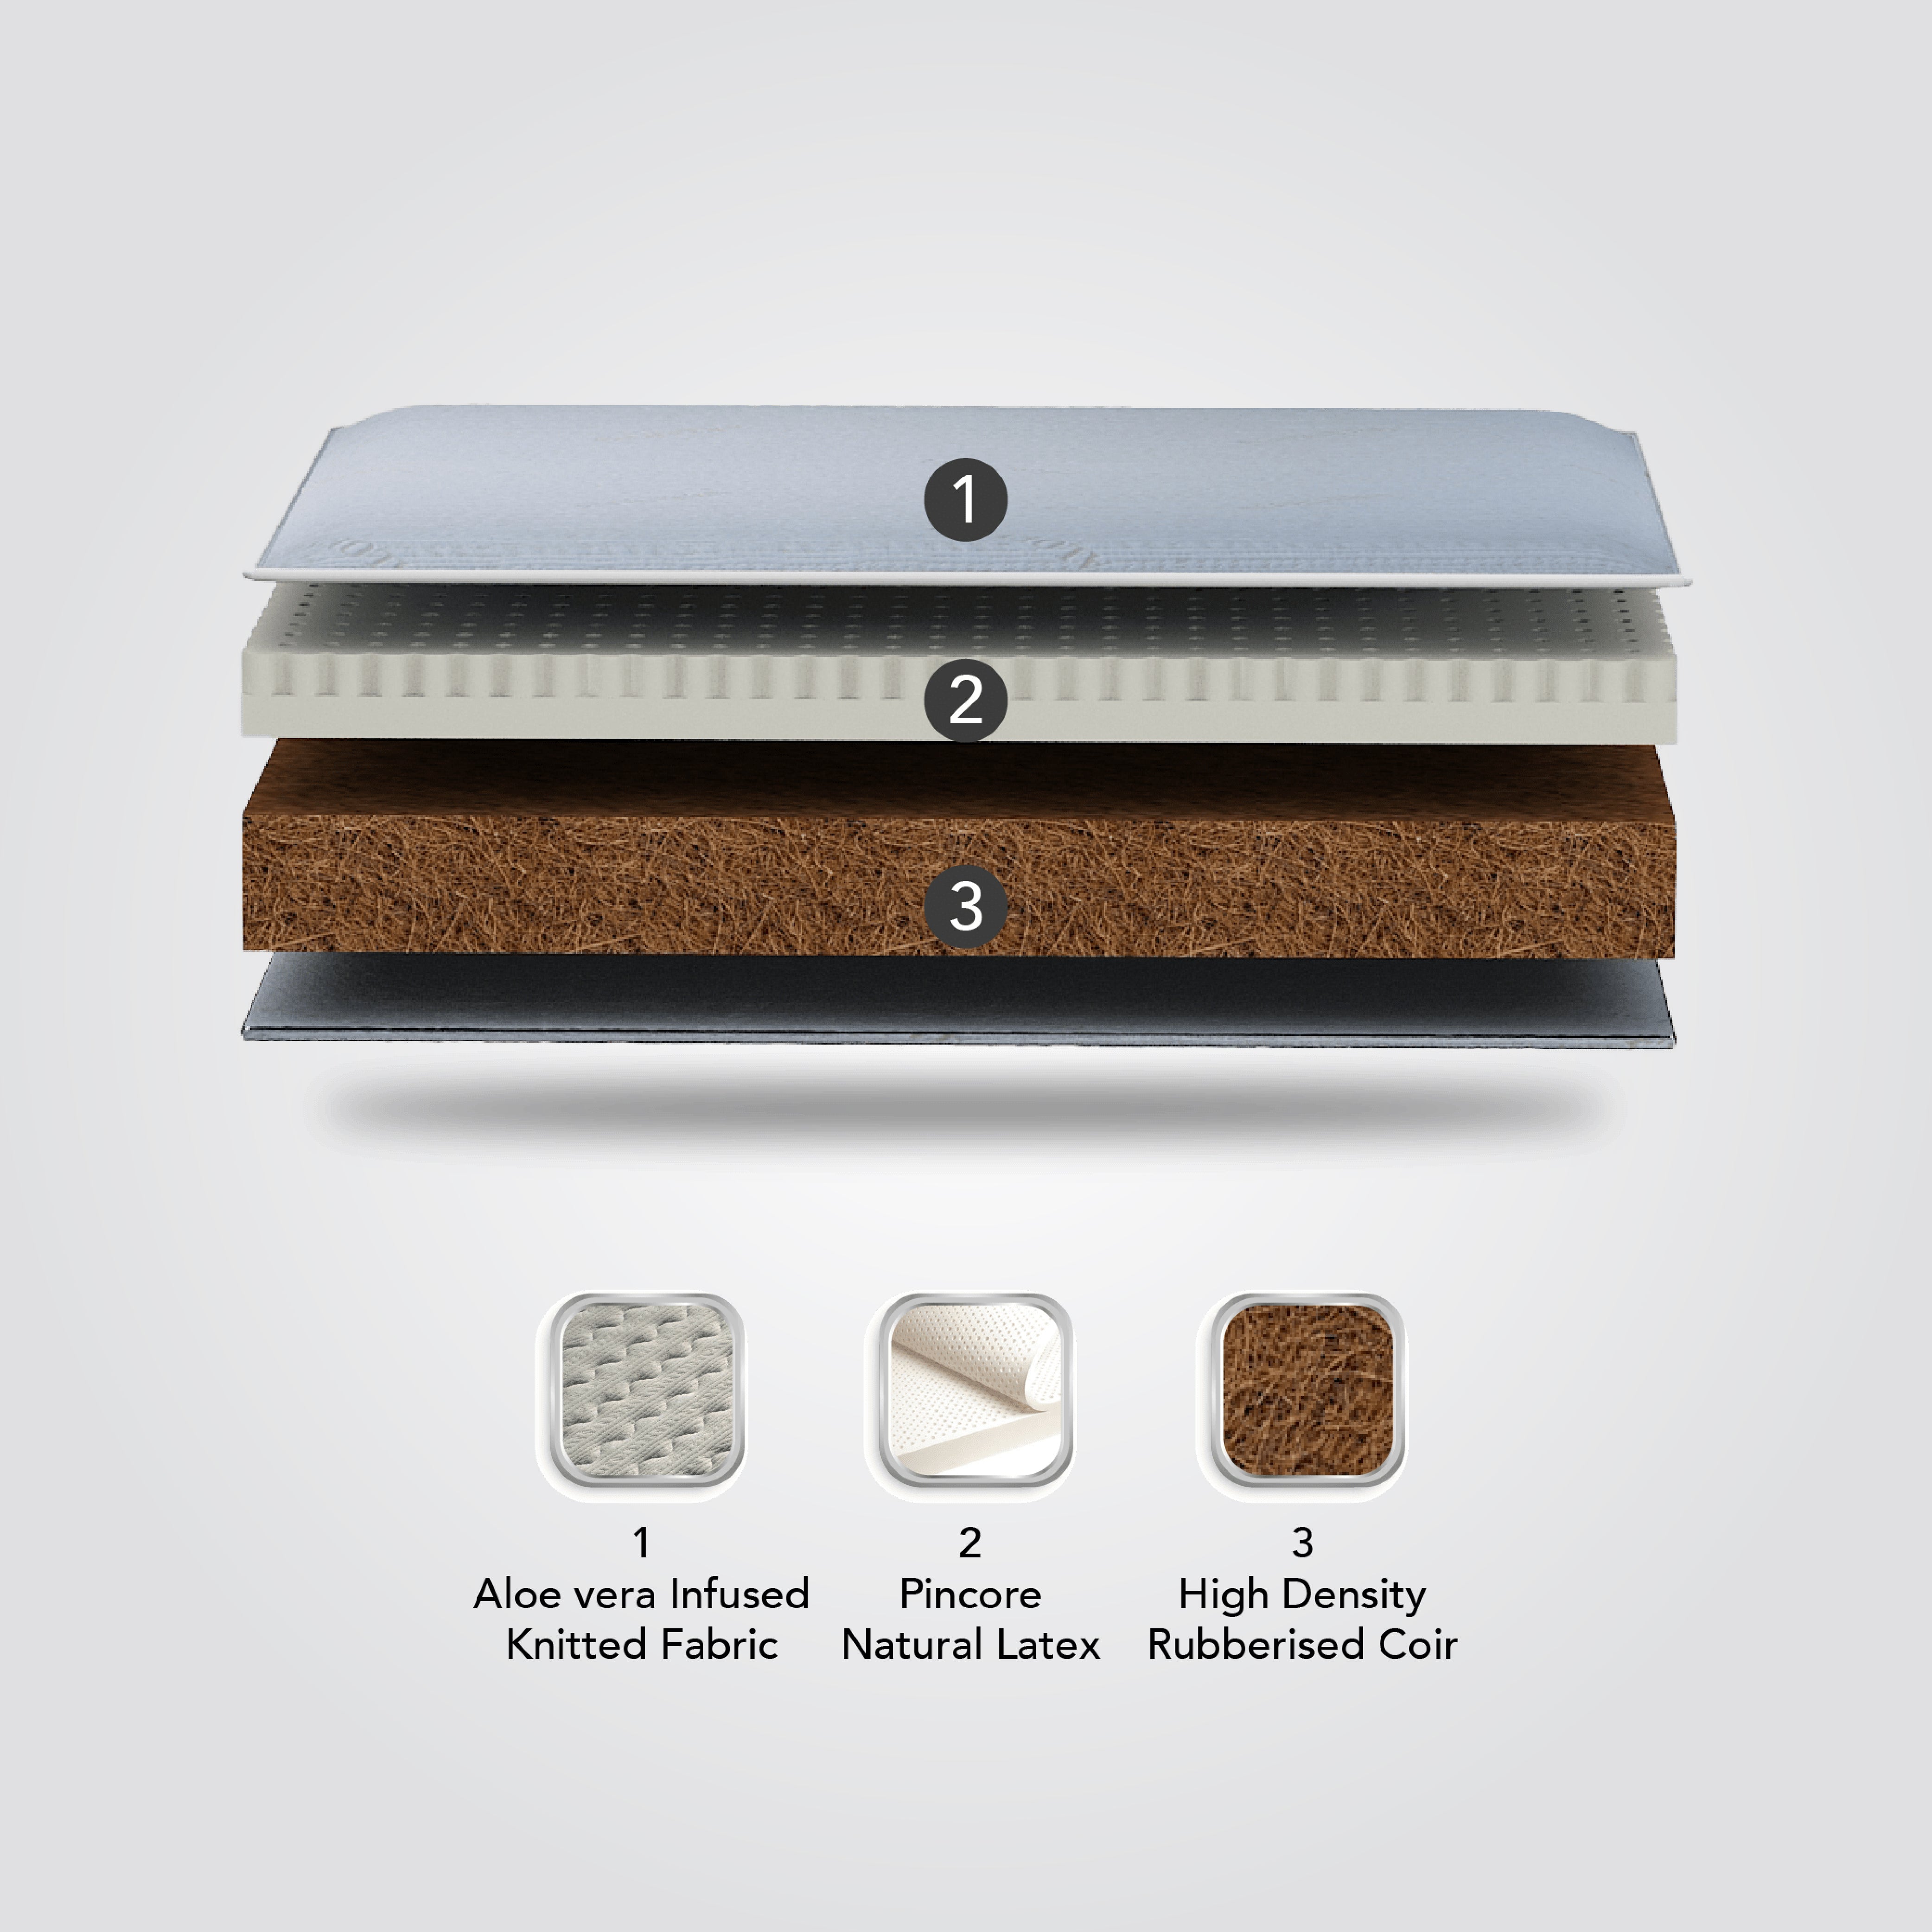 Hypoallergenic Rubberized Coir And Natural Latex Mattress In India